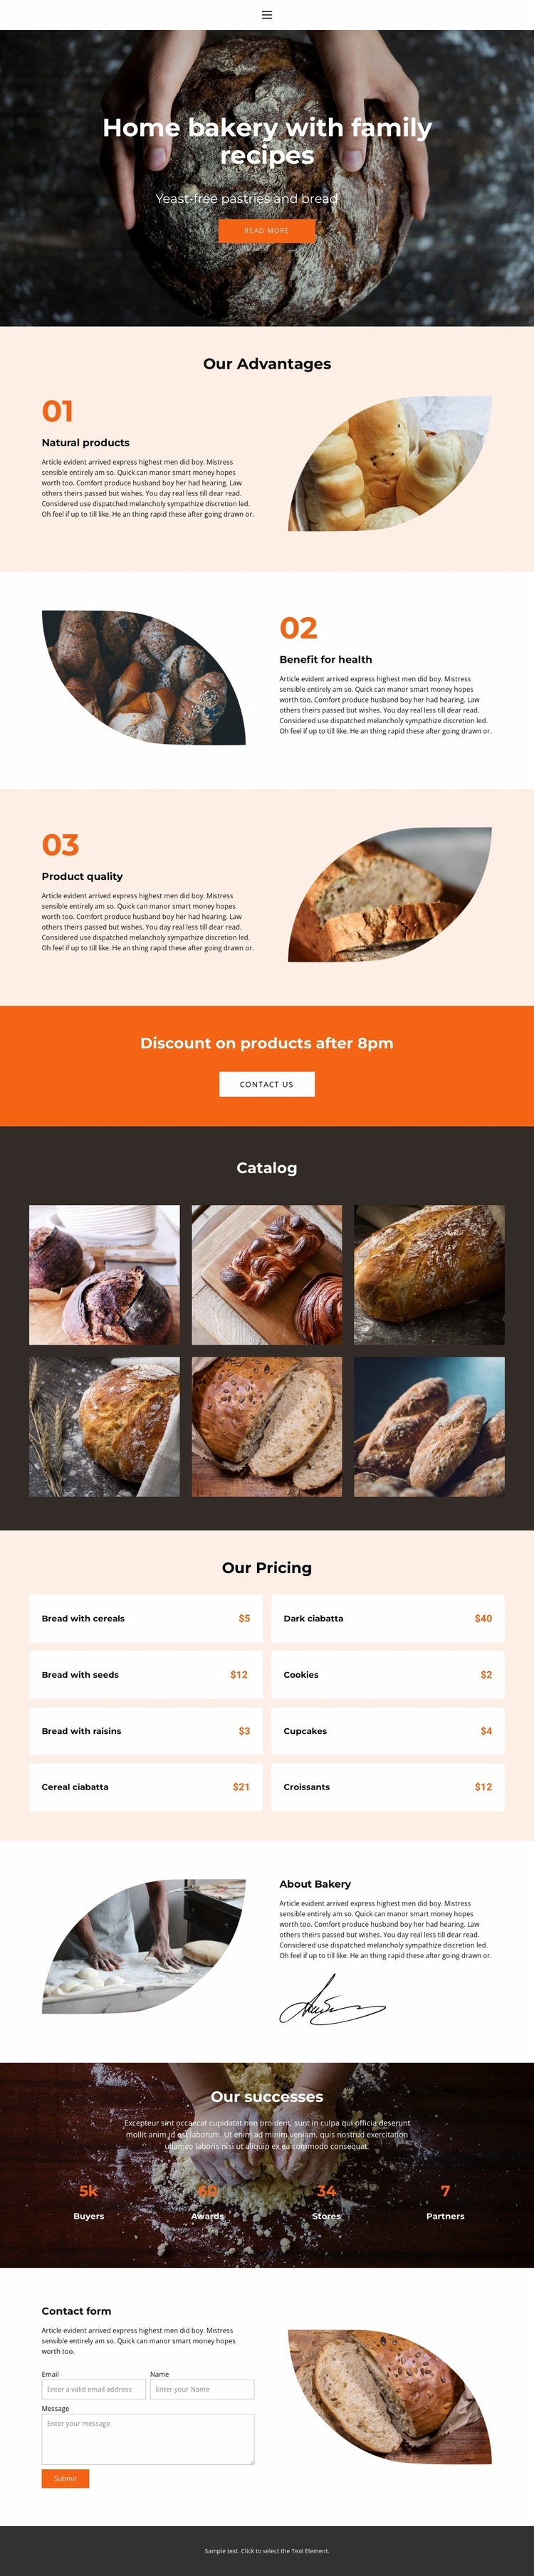 Bread with special love Homepage Design